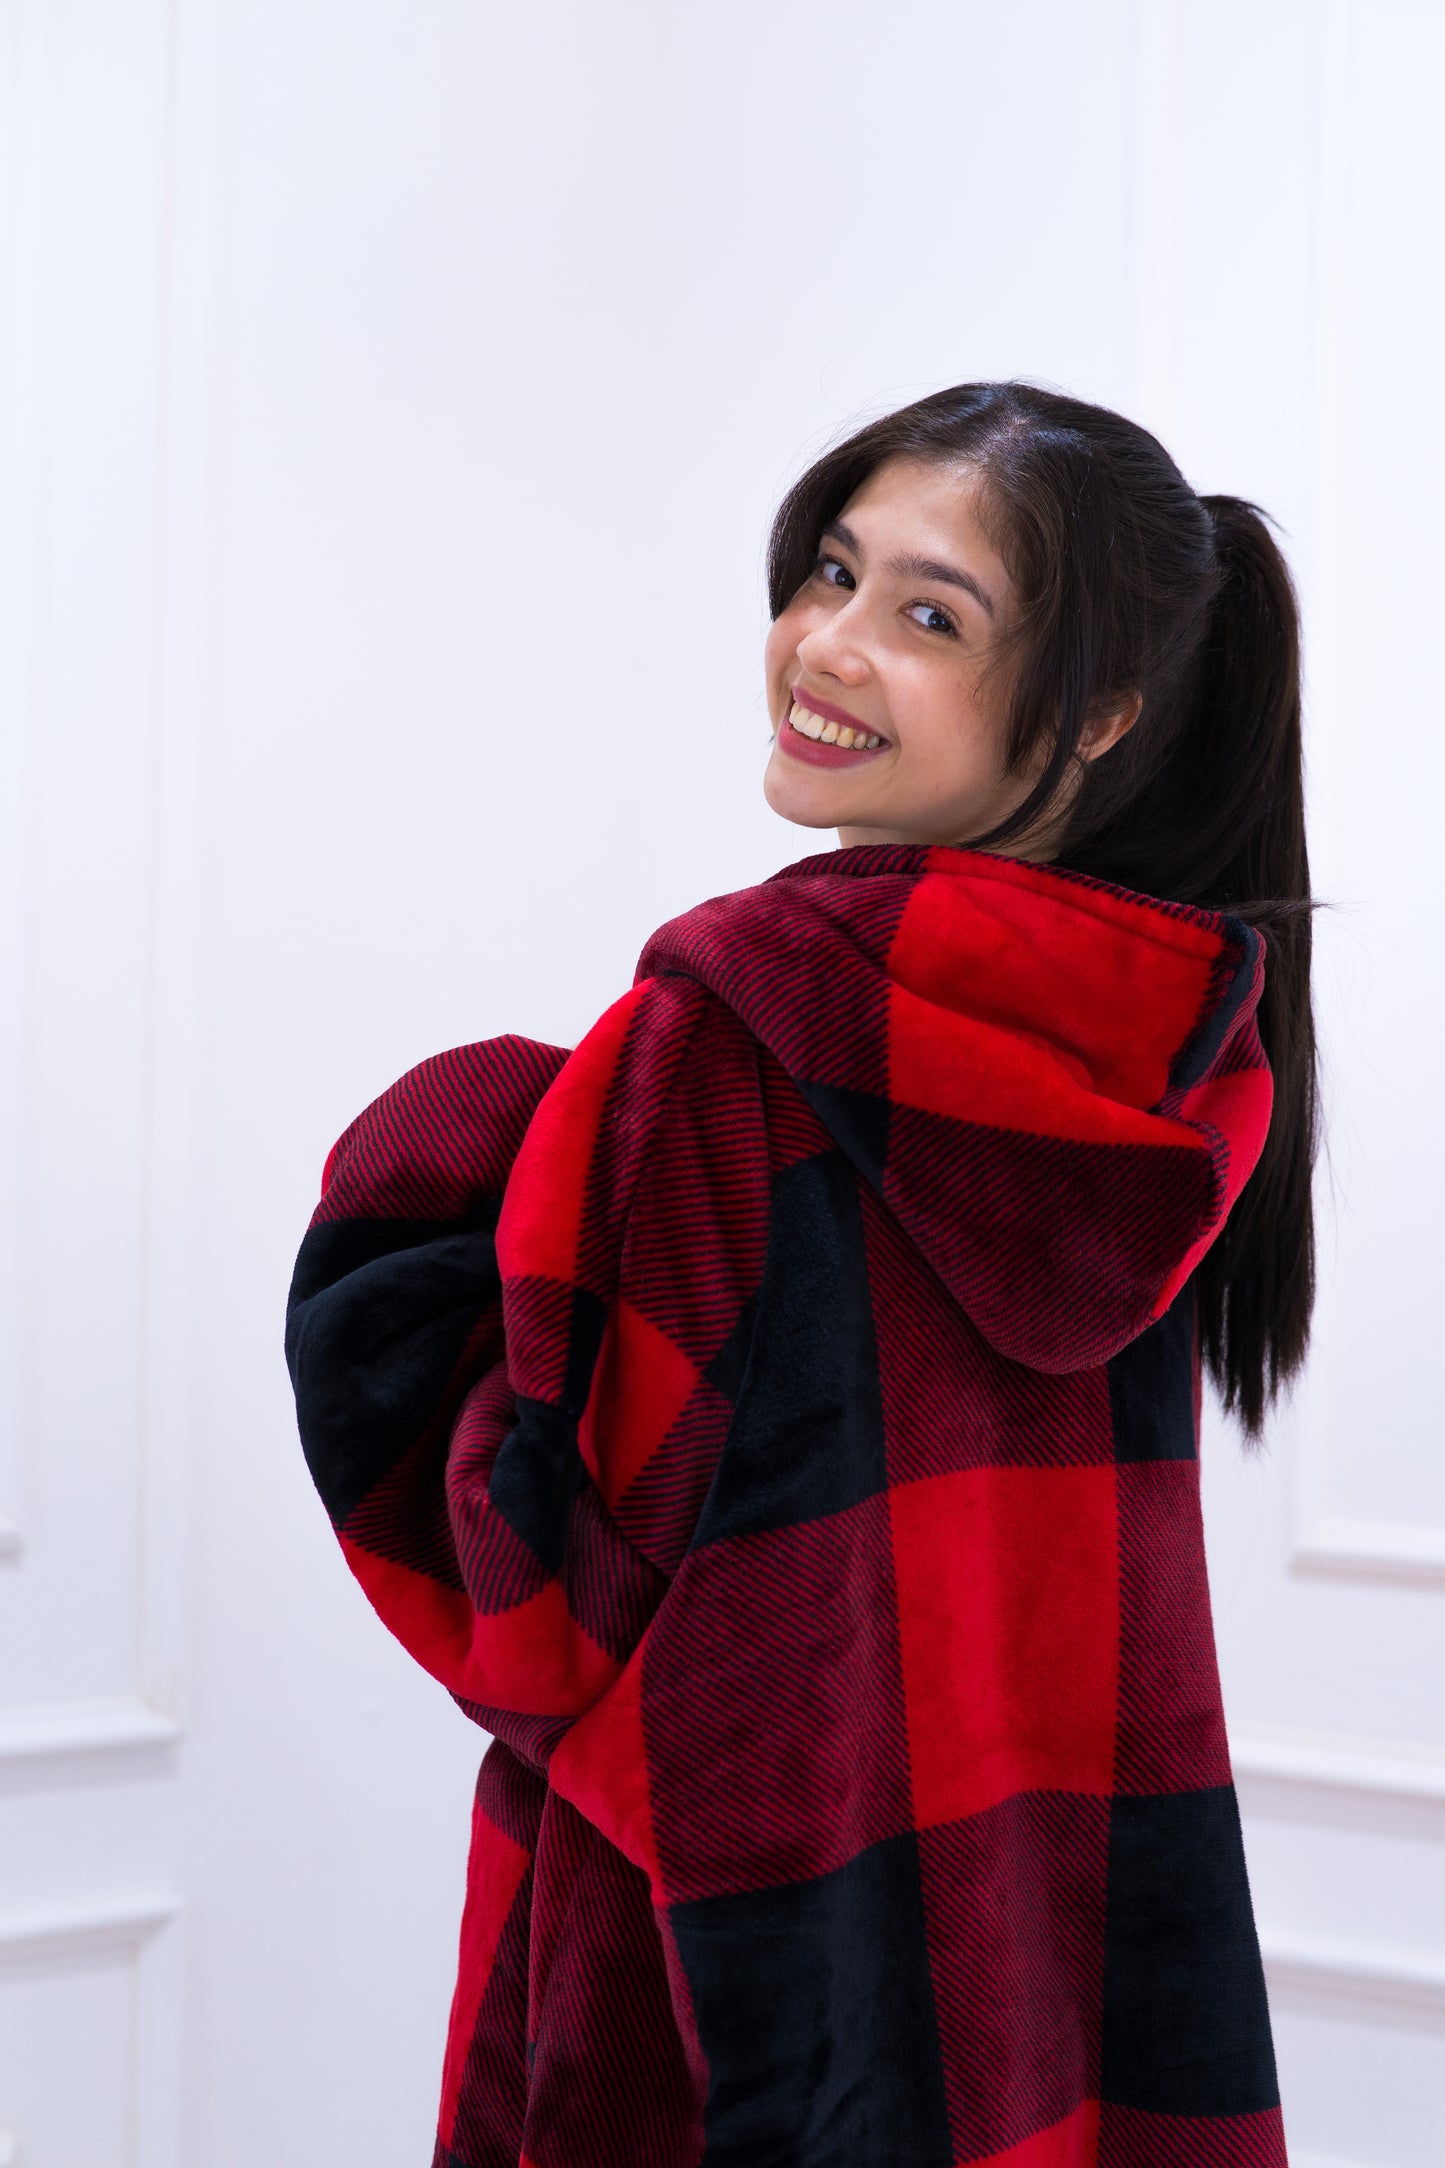 Black & Red Plaid Wearable Blanket for Adults